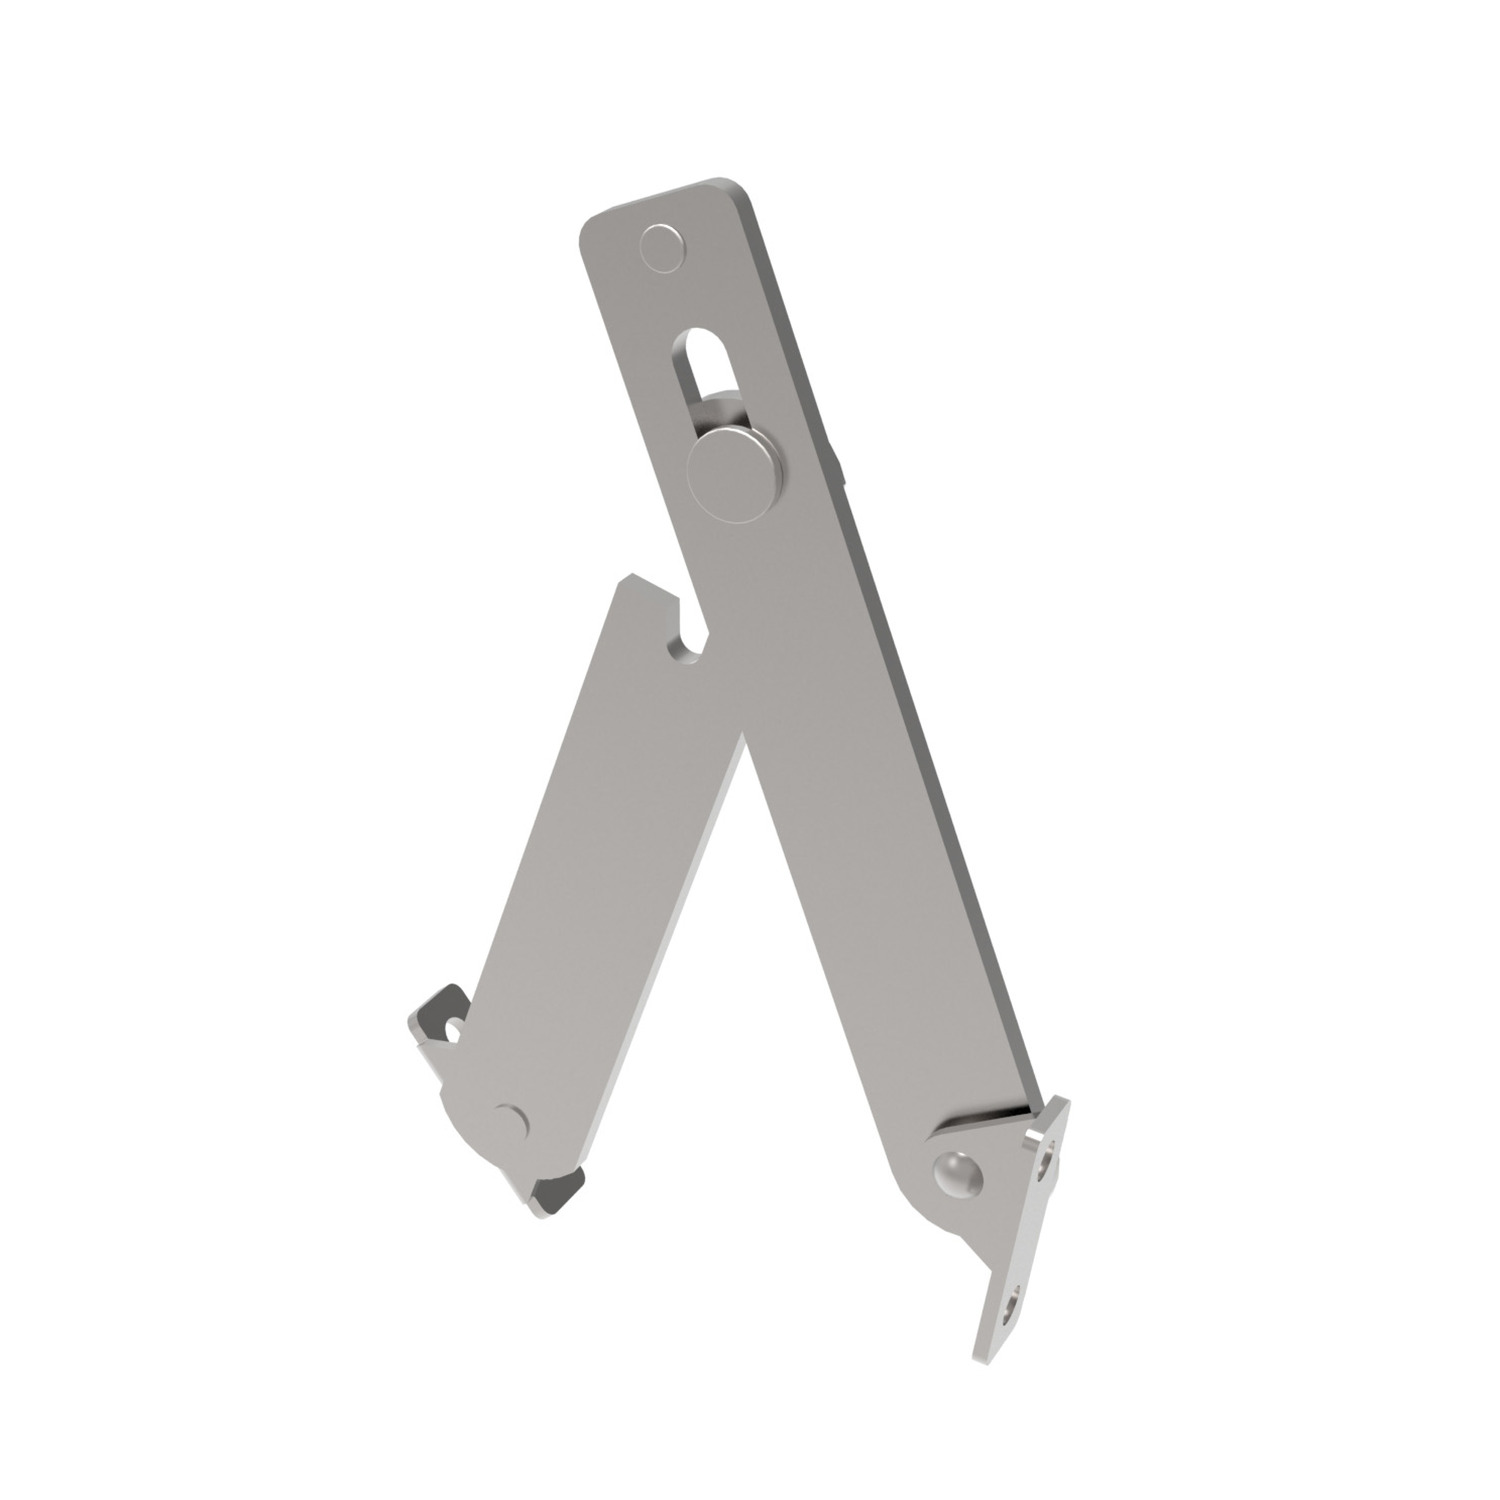 N0956.AC0006 Lid Stays - Heavy Duty Stainless steel - Right - 135mm. Supplied in multiples of 2